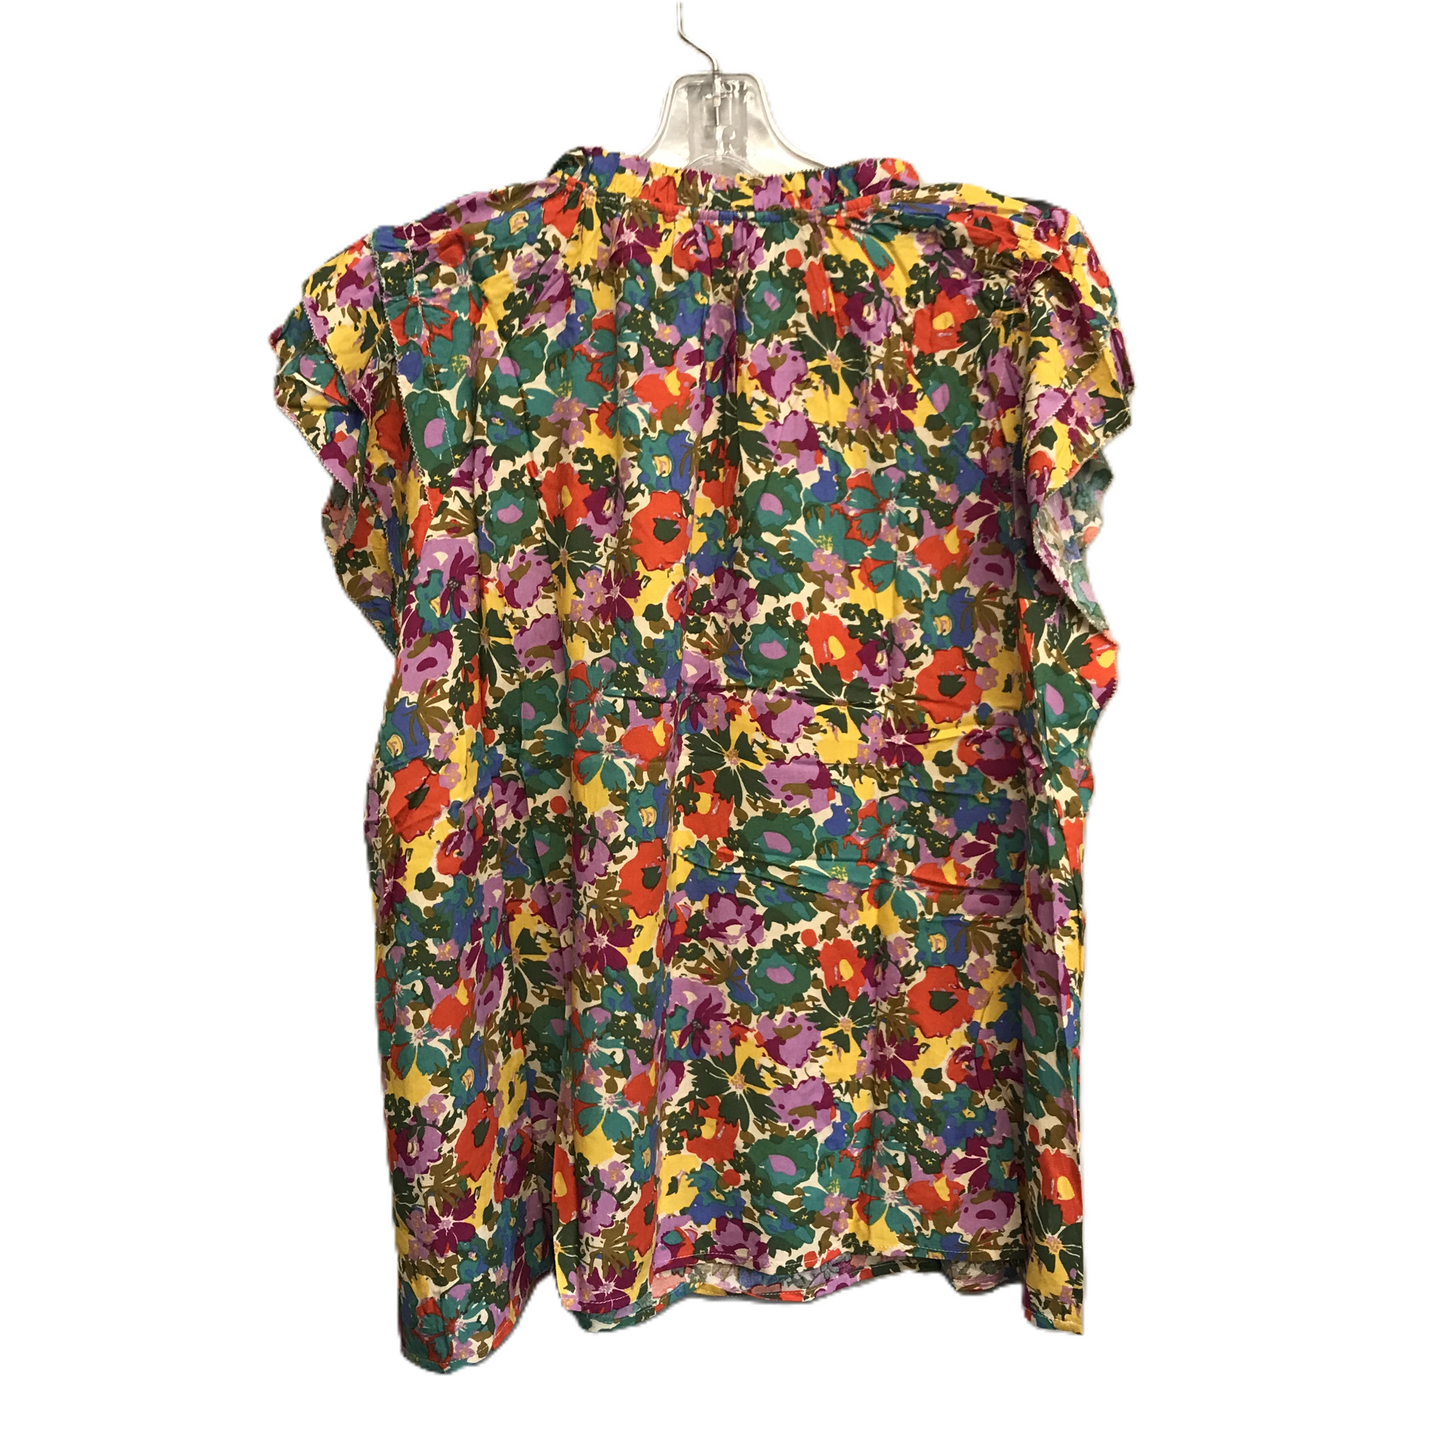 Floral Print Top Short Sleeve By Ee Some, Size: L